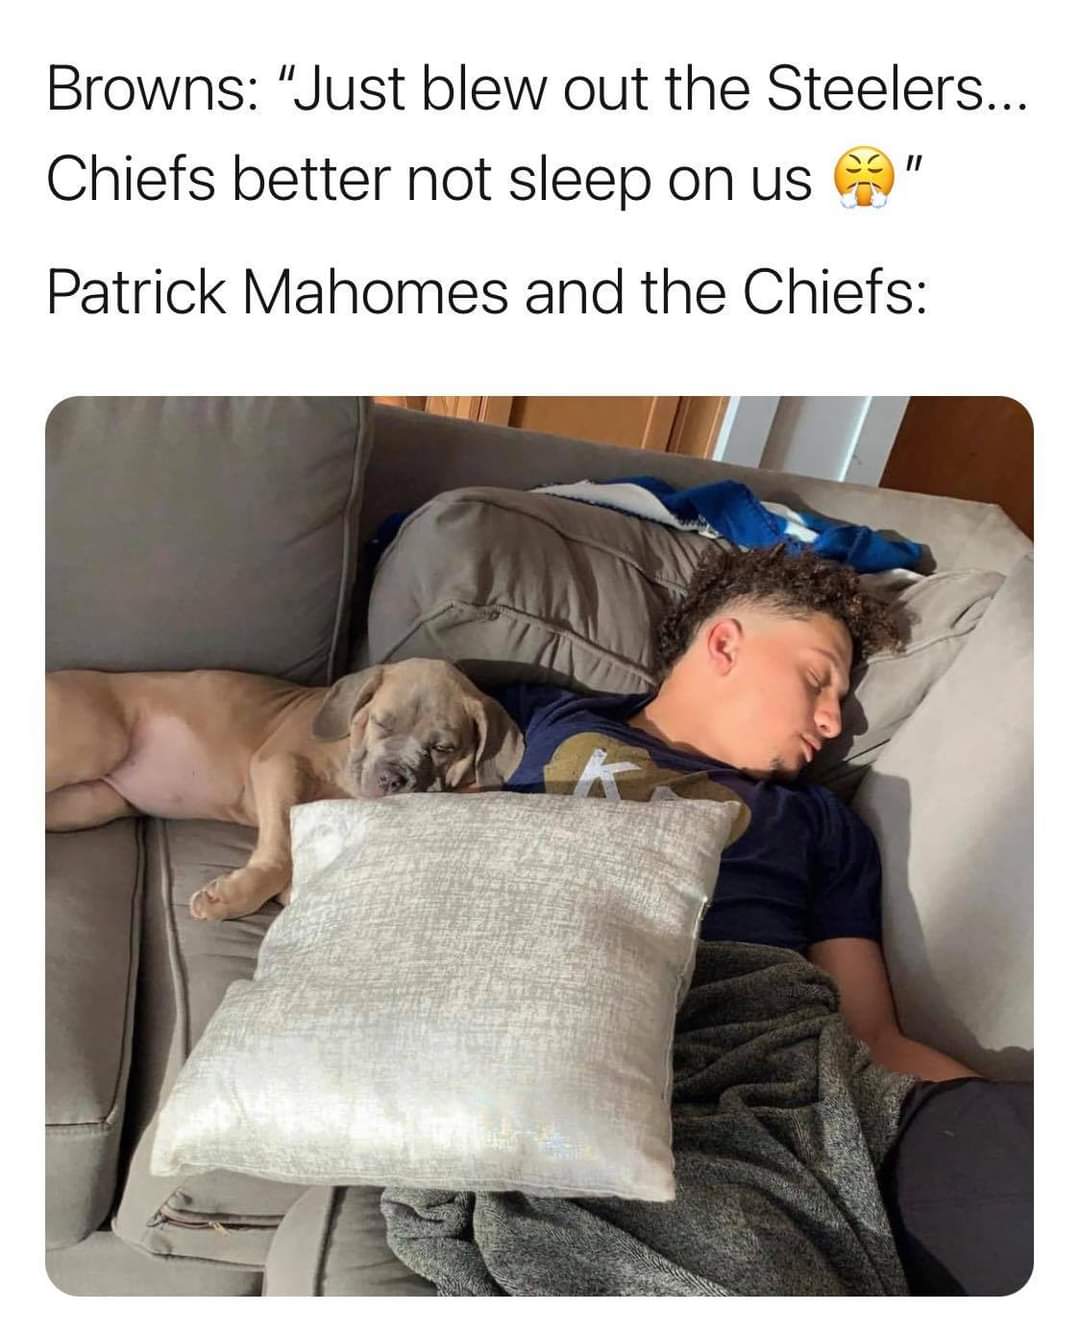 dog - Browns "Just blew out the Steelers... Chiefs better not sleep on us Patrick Mahomes and the Chiefs